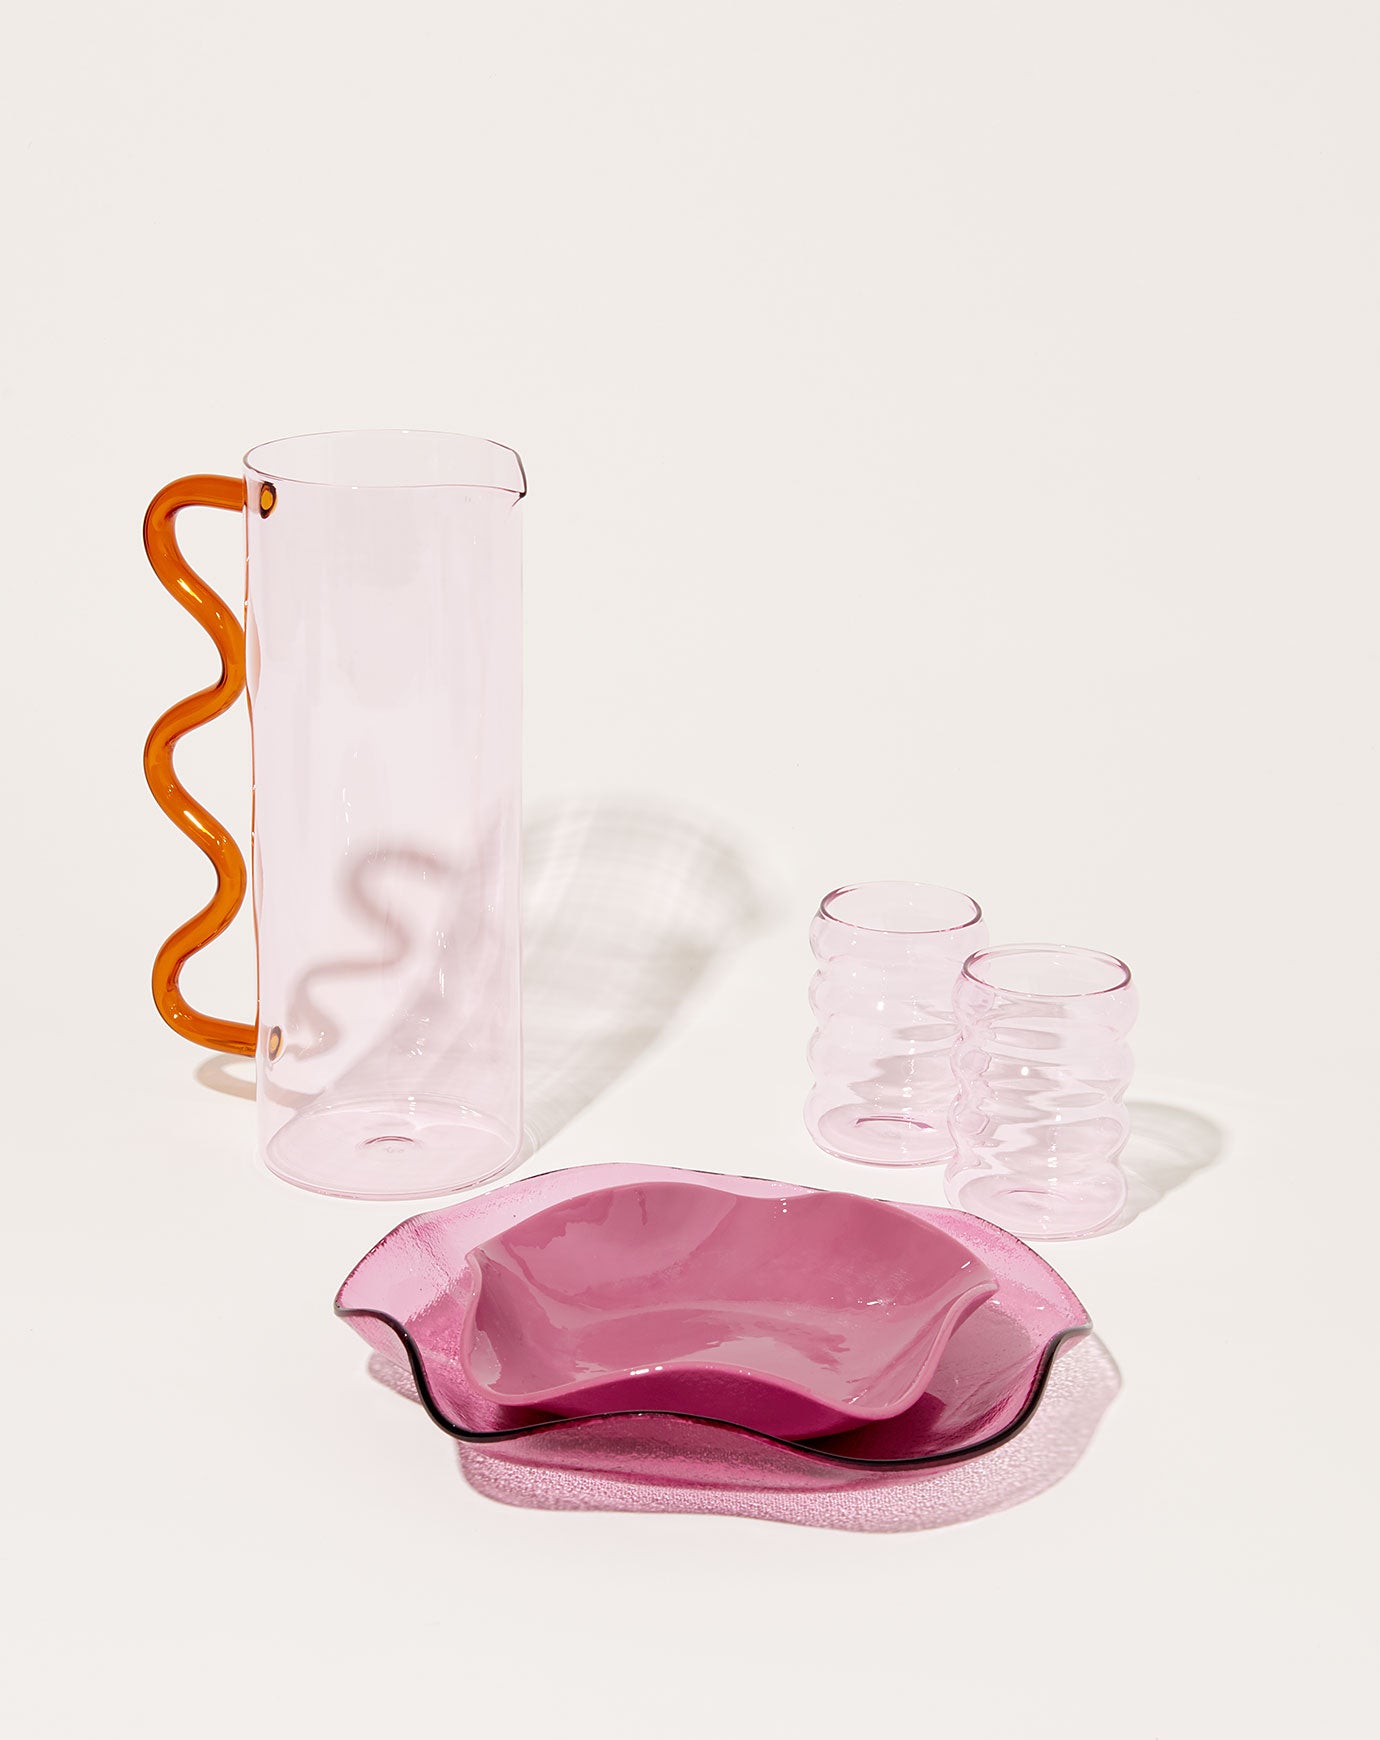 Sophie Lou Jacobsen Wave Pitcher in Pink with Amber